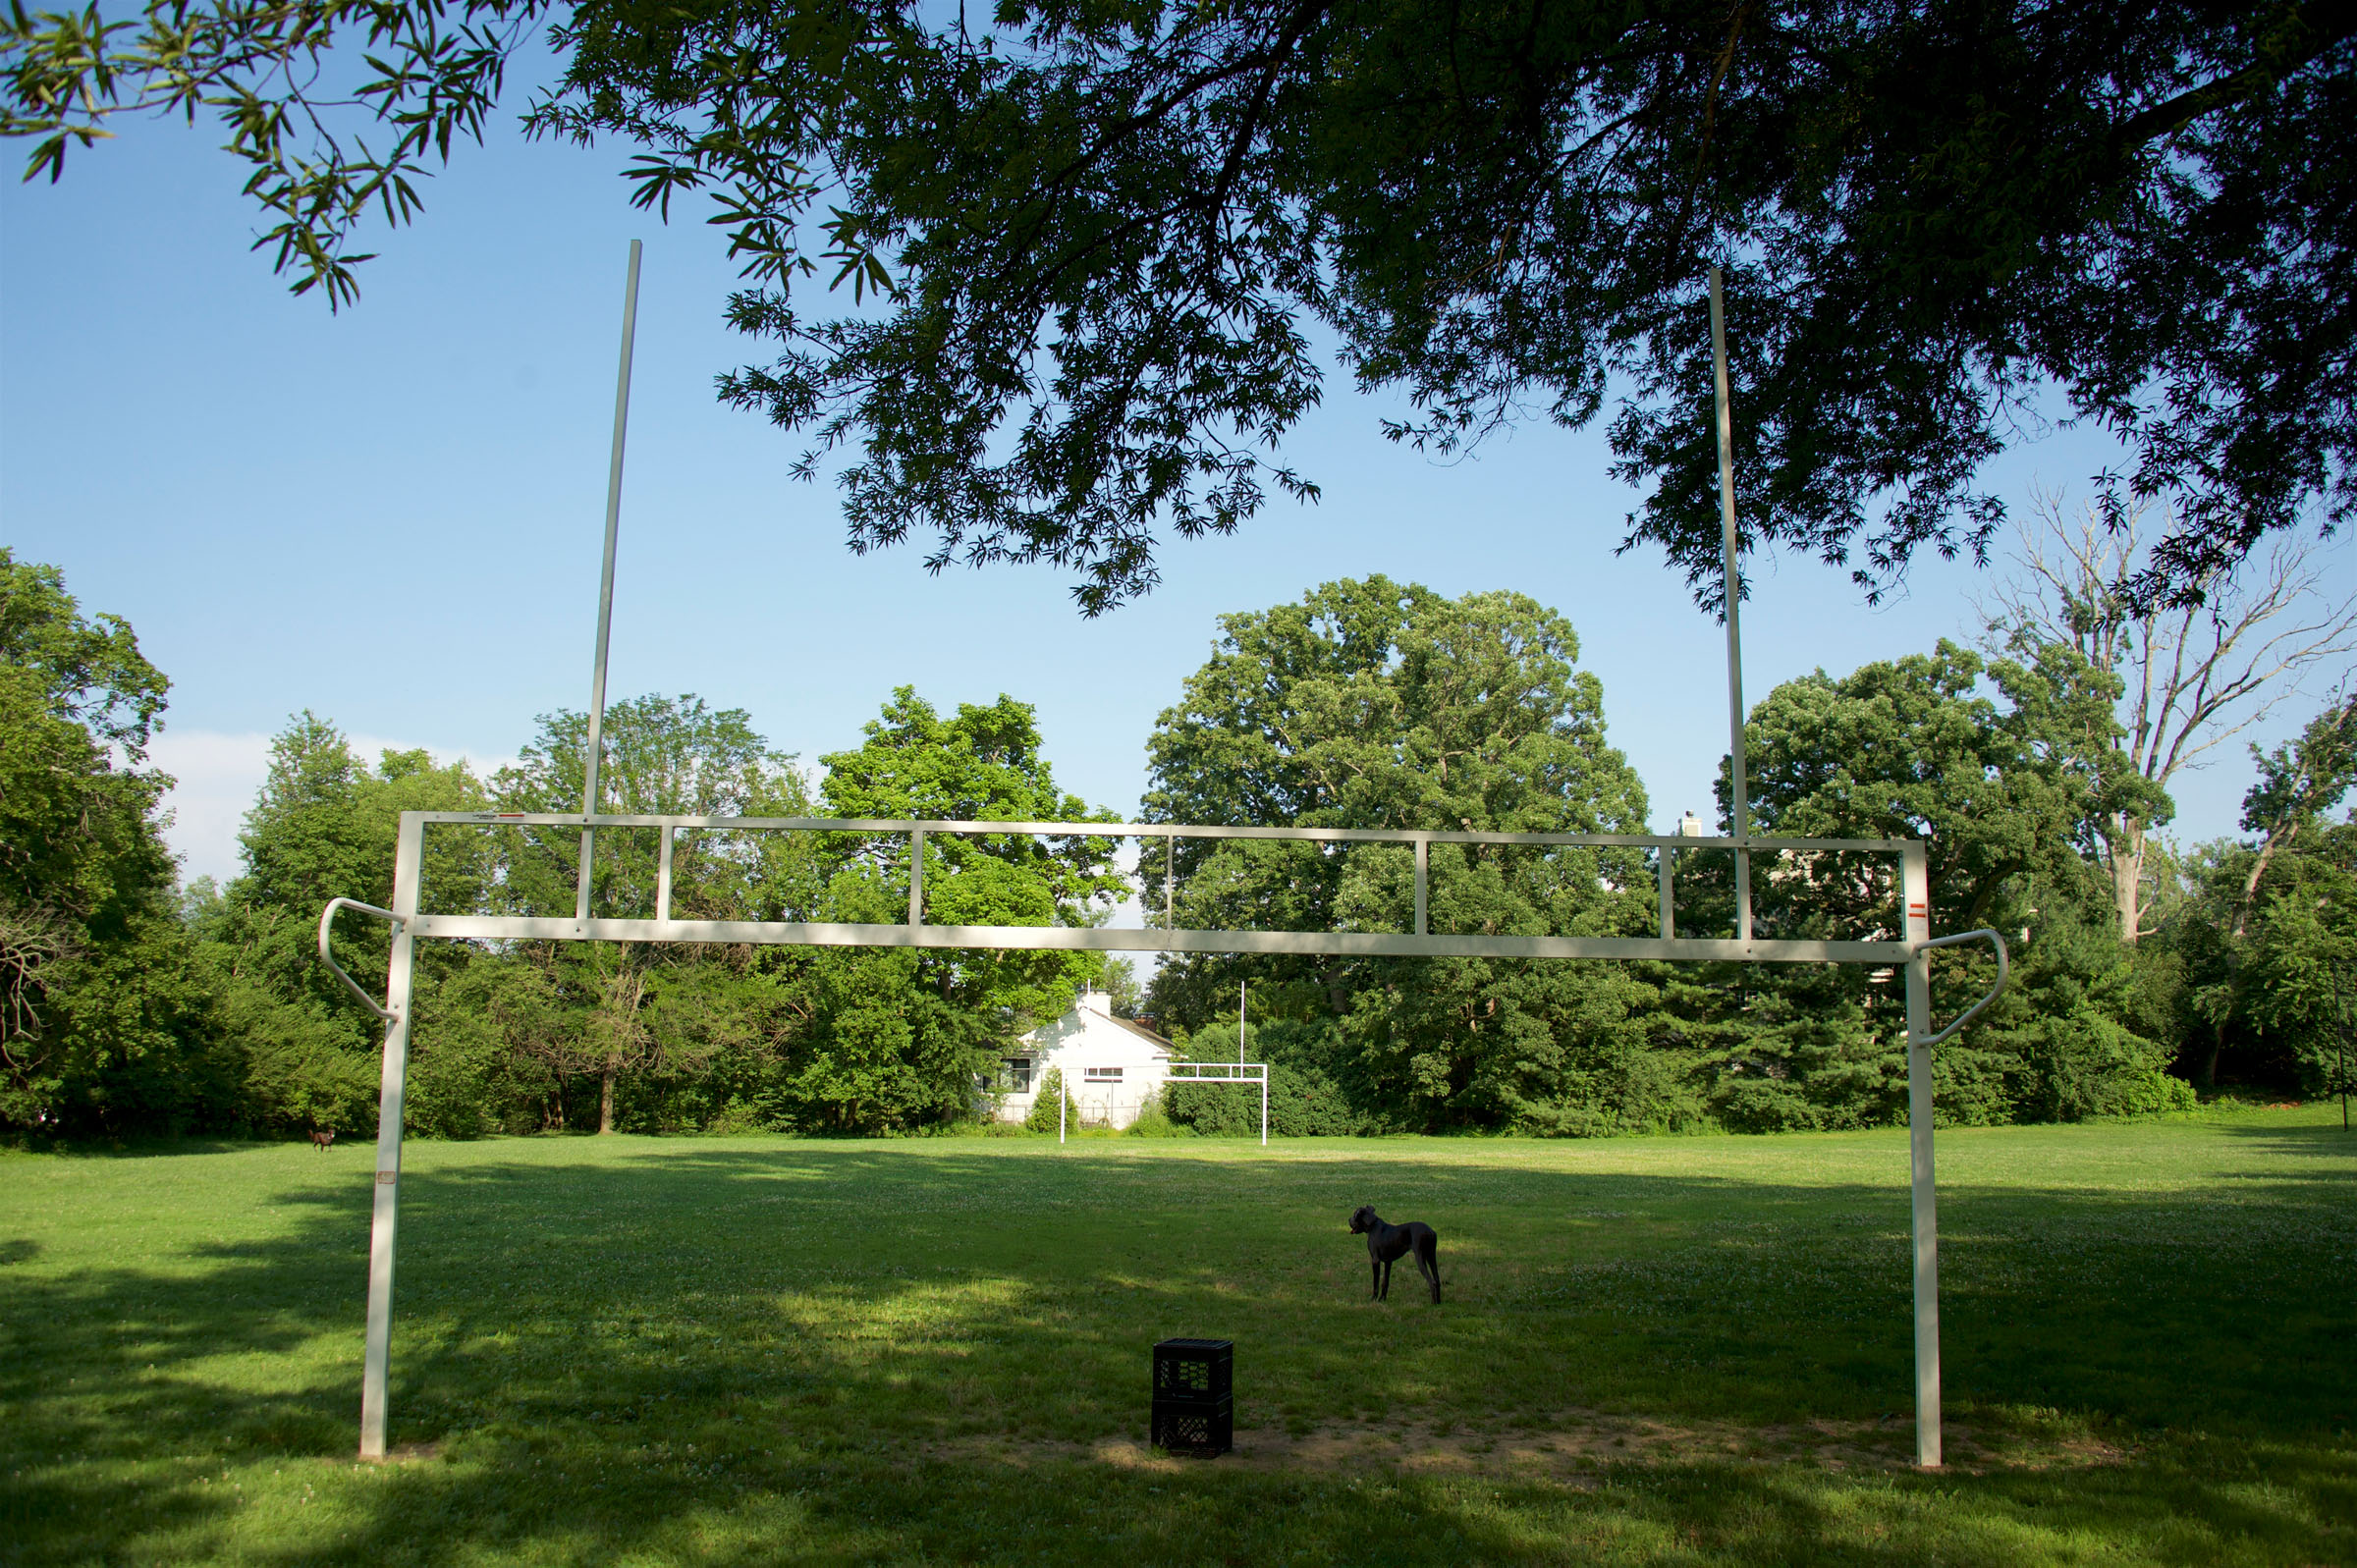 Chevy Chase Local Park